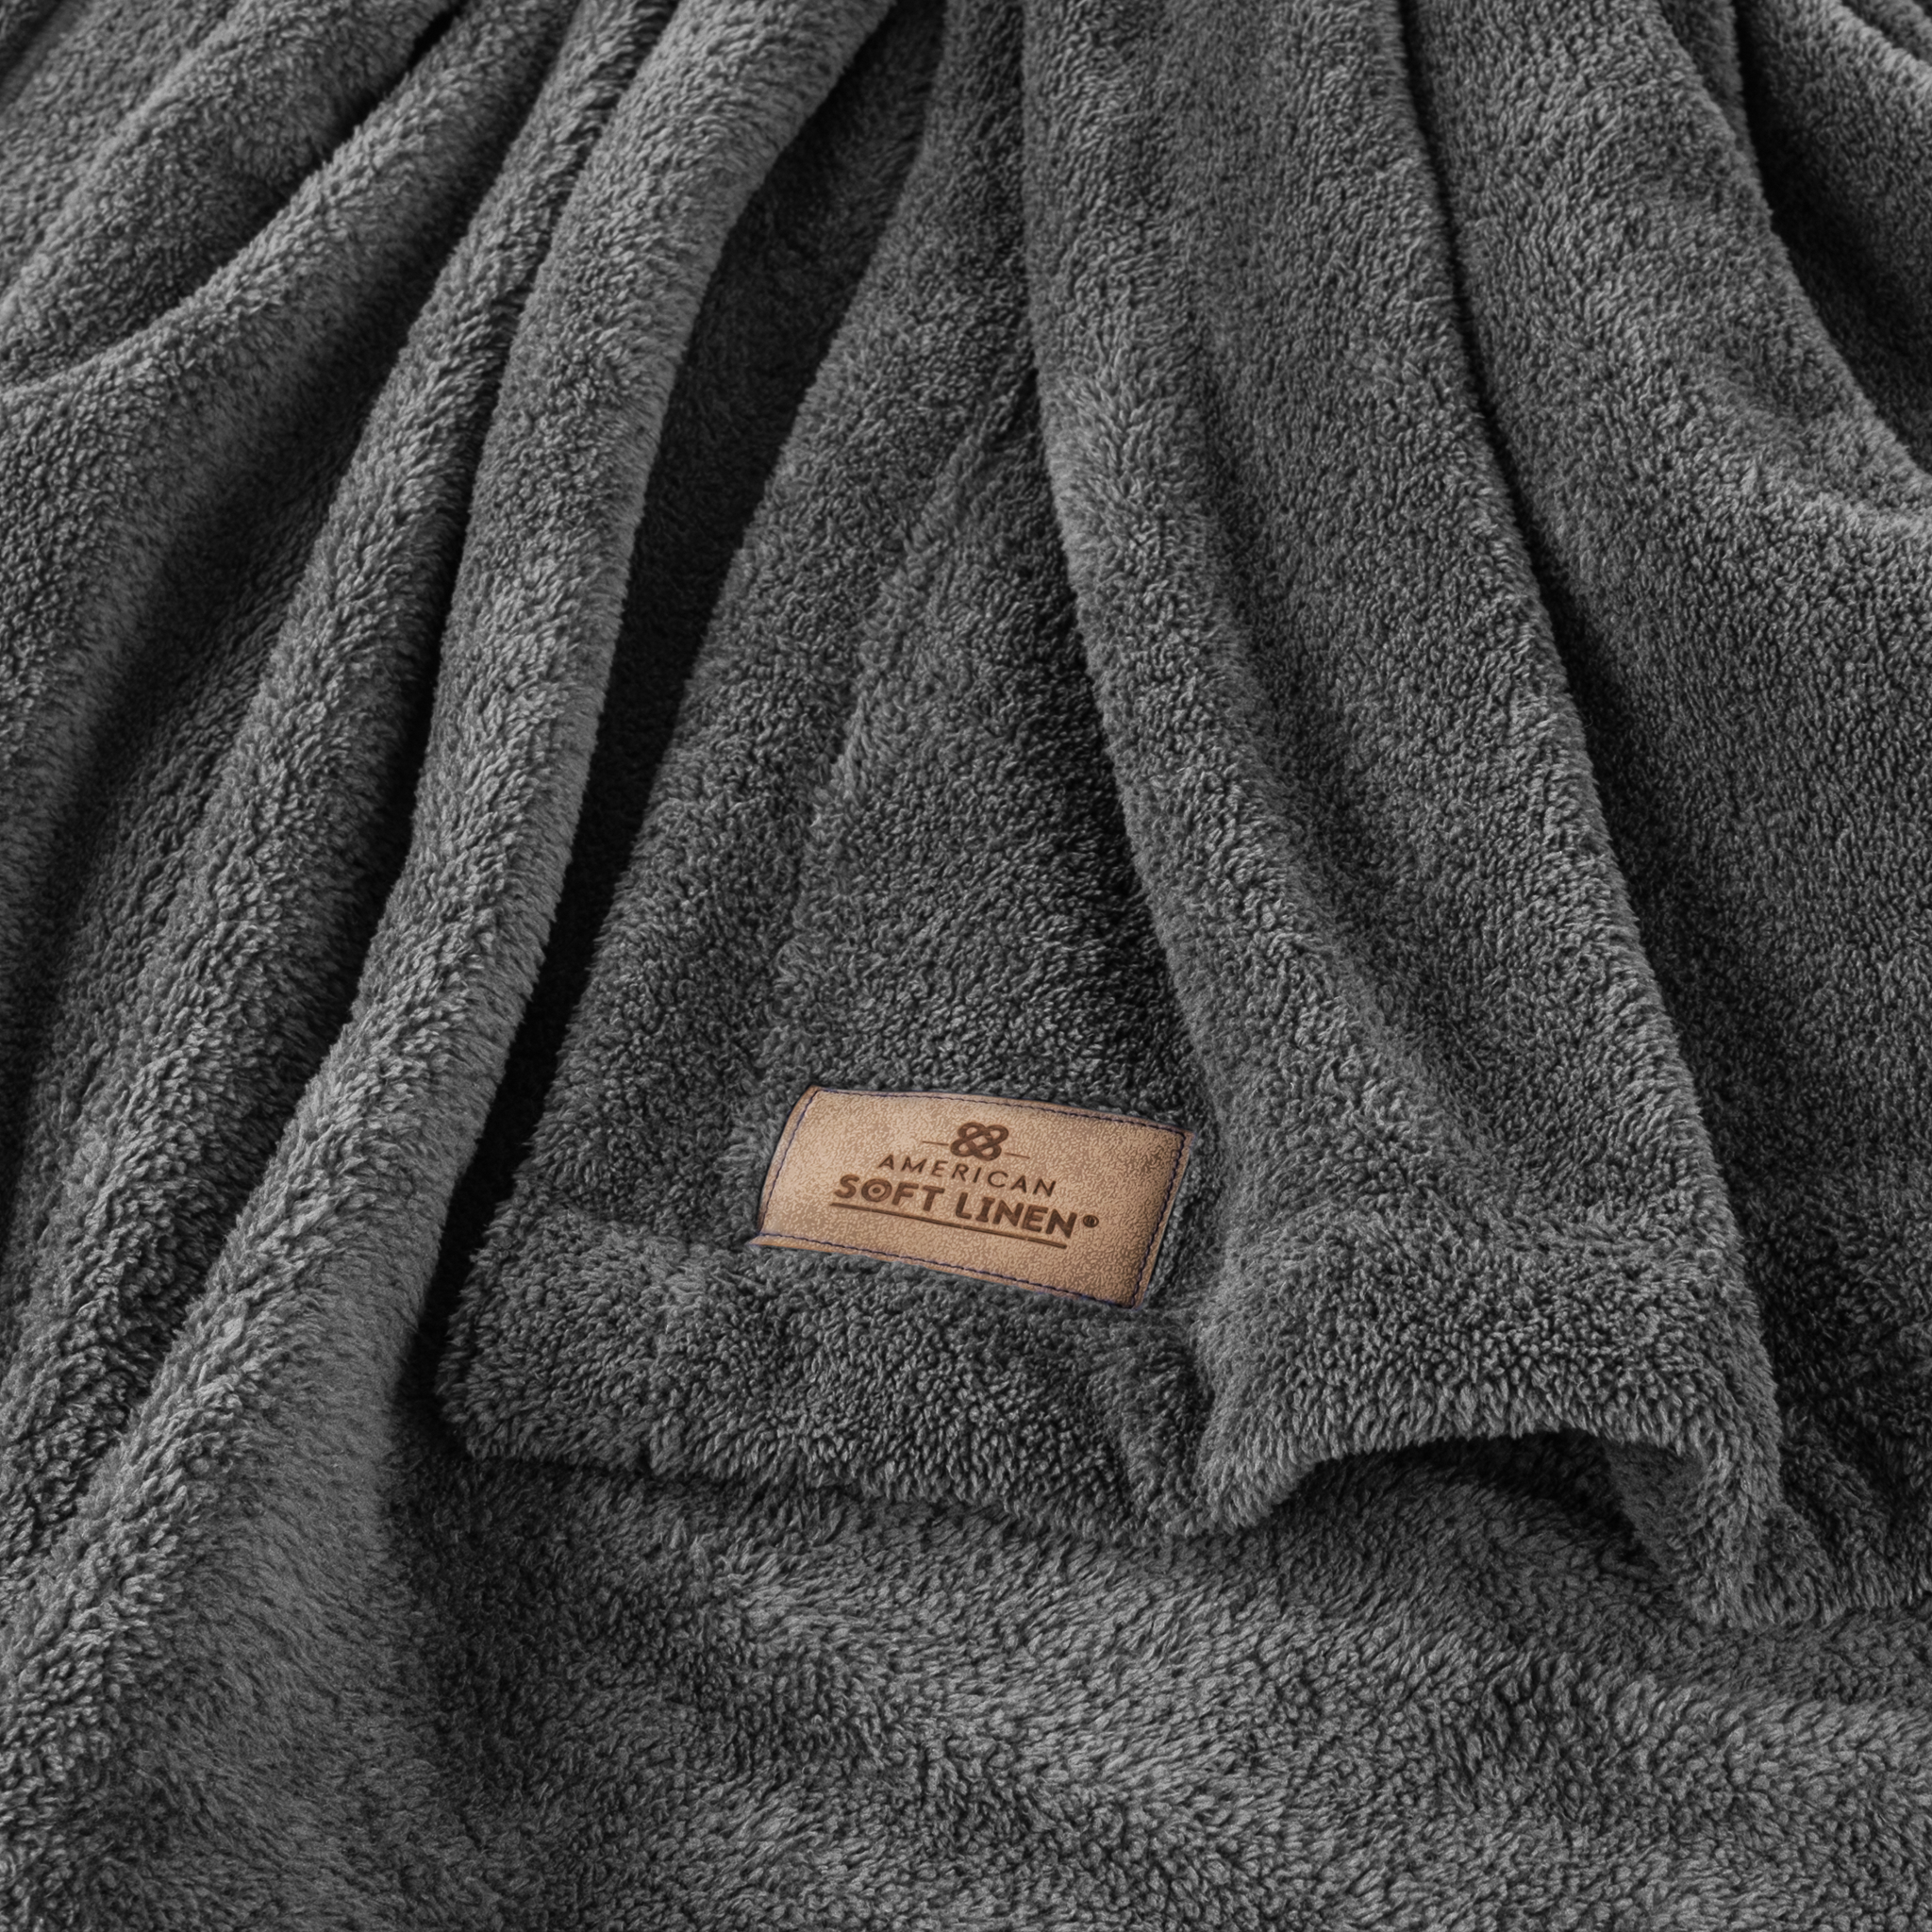 American Soft Linen - Bedding Fleece Blanket - Wholesale - 24 Set Case Pack - Throw Size 50x60 inches - Gray - 4